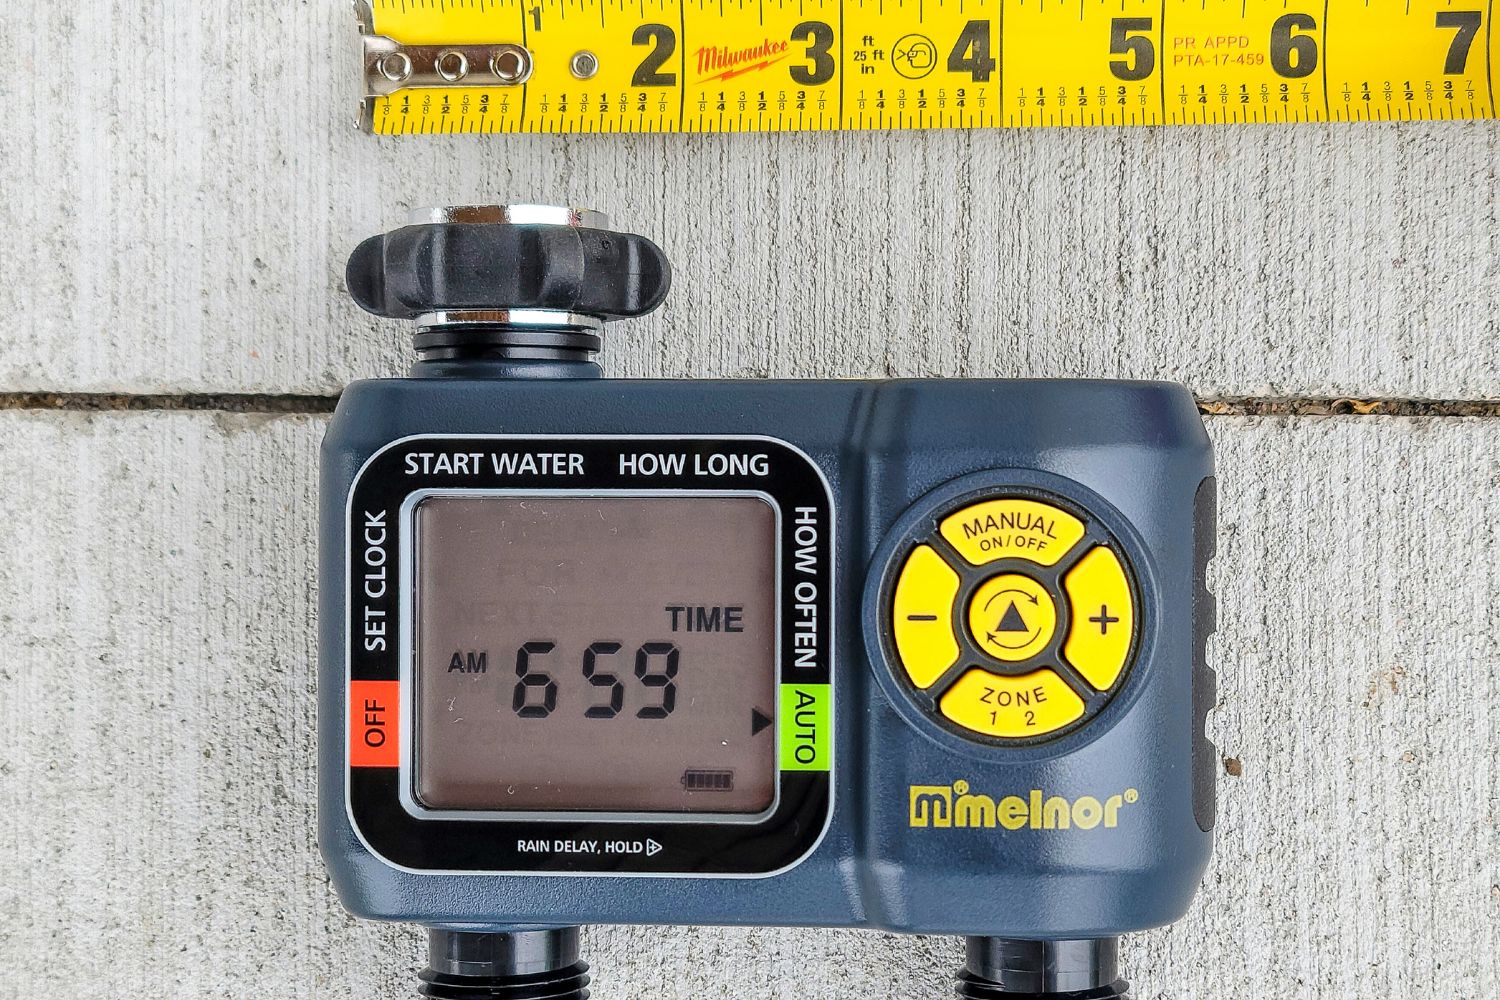 Melnor dual zone hose timer on cement walkway measuring 5 inches